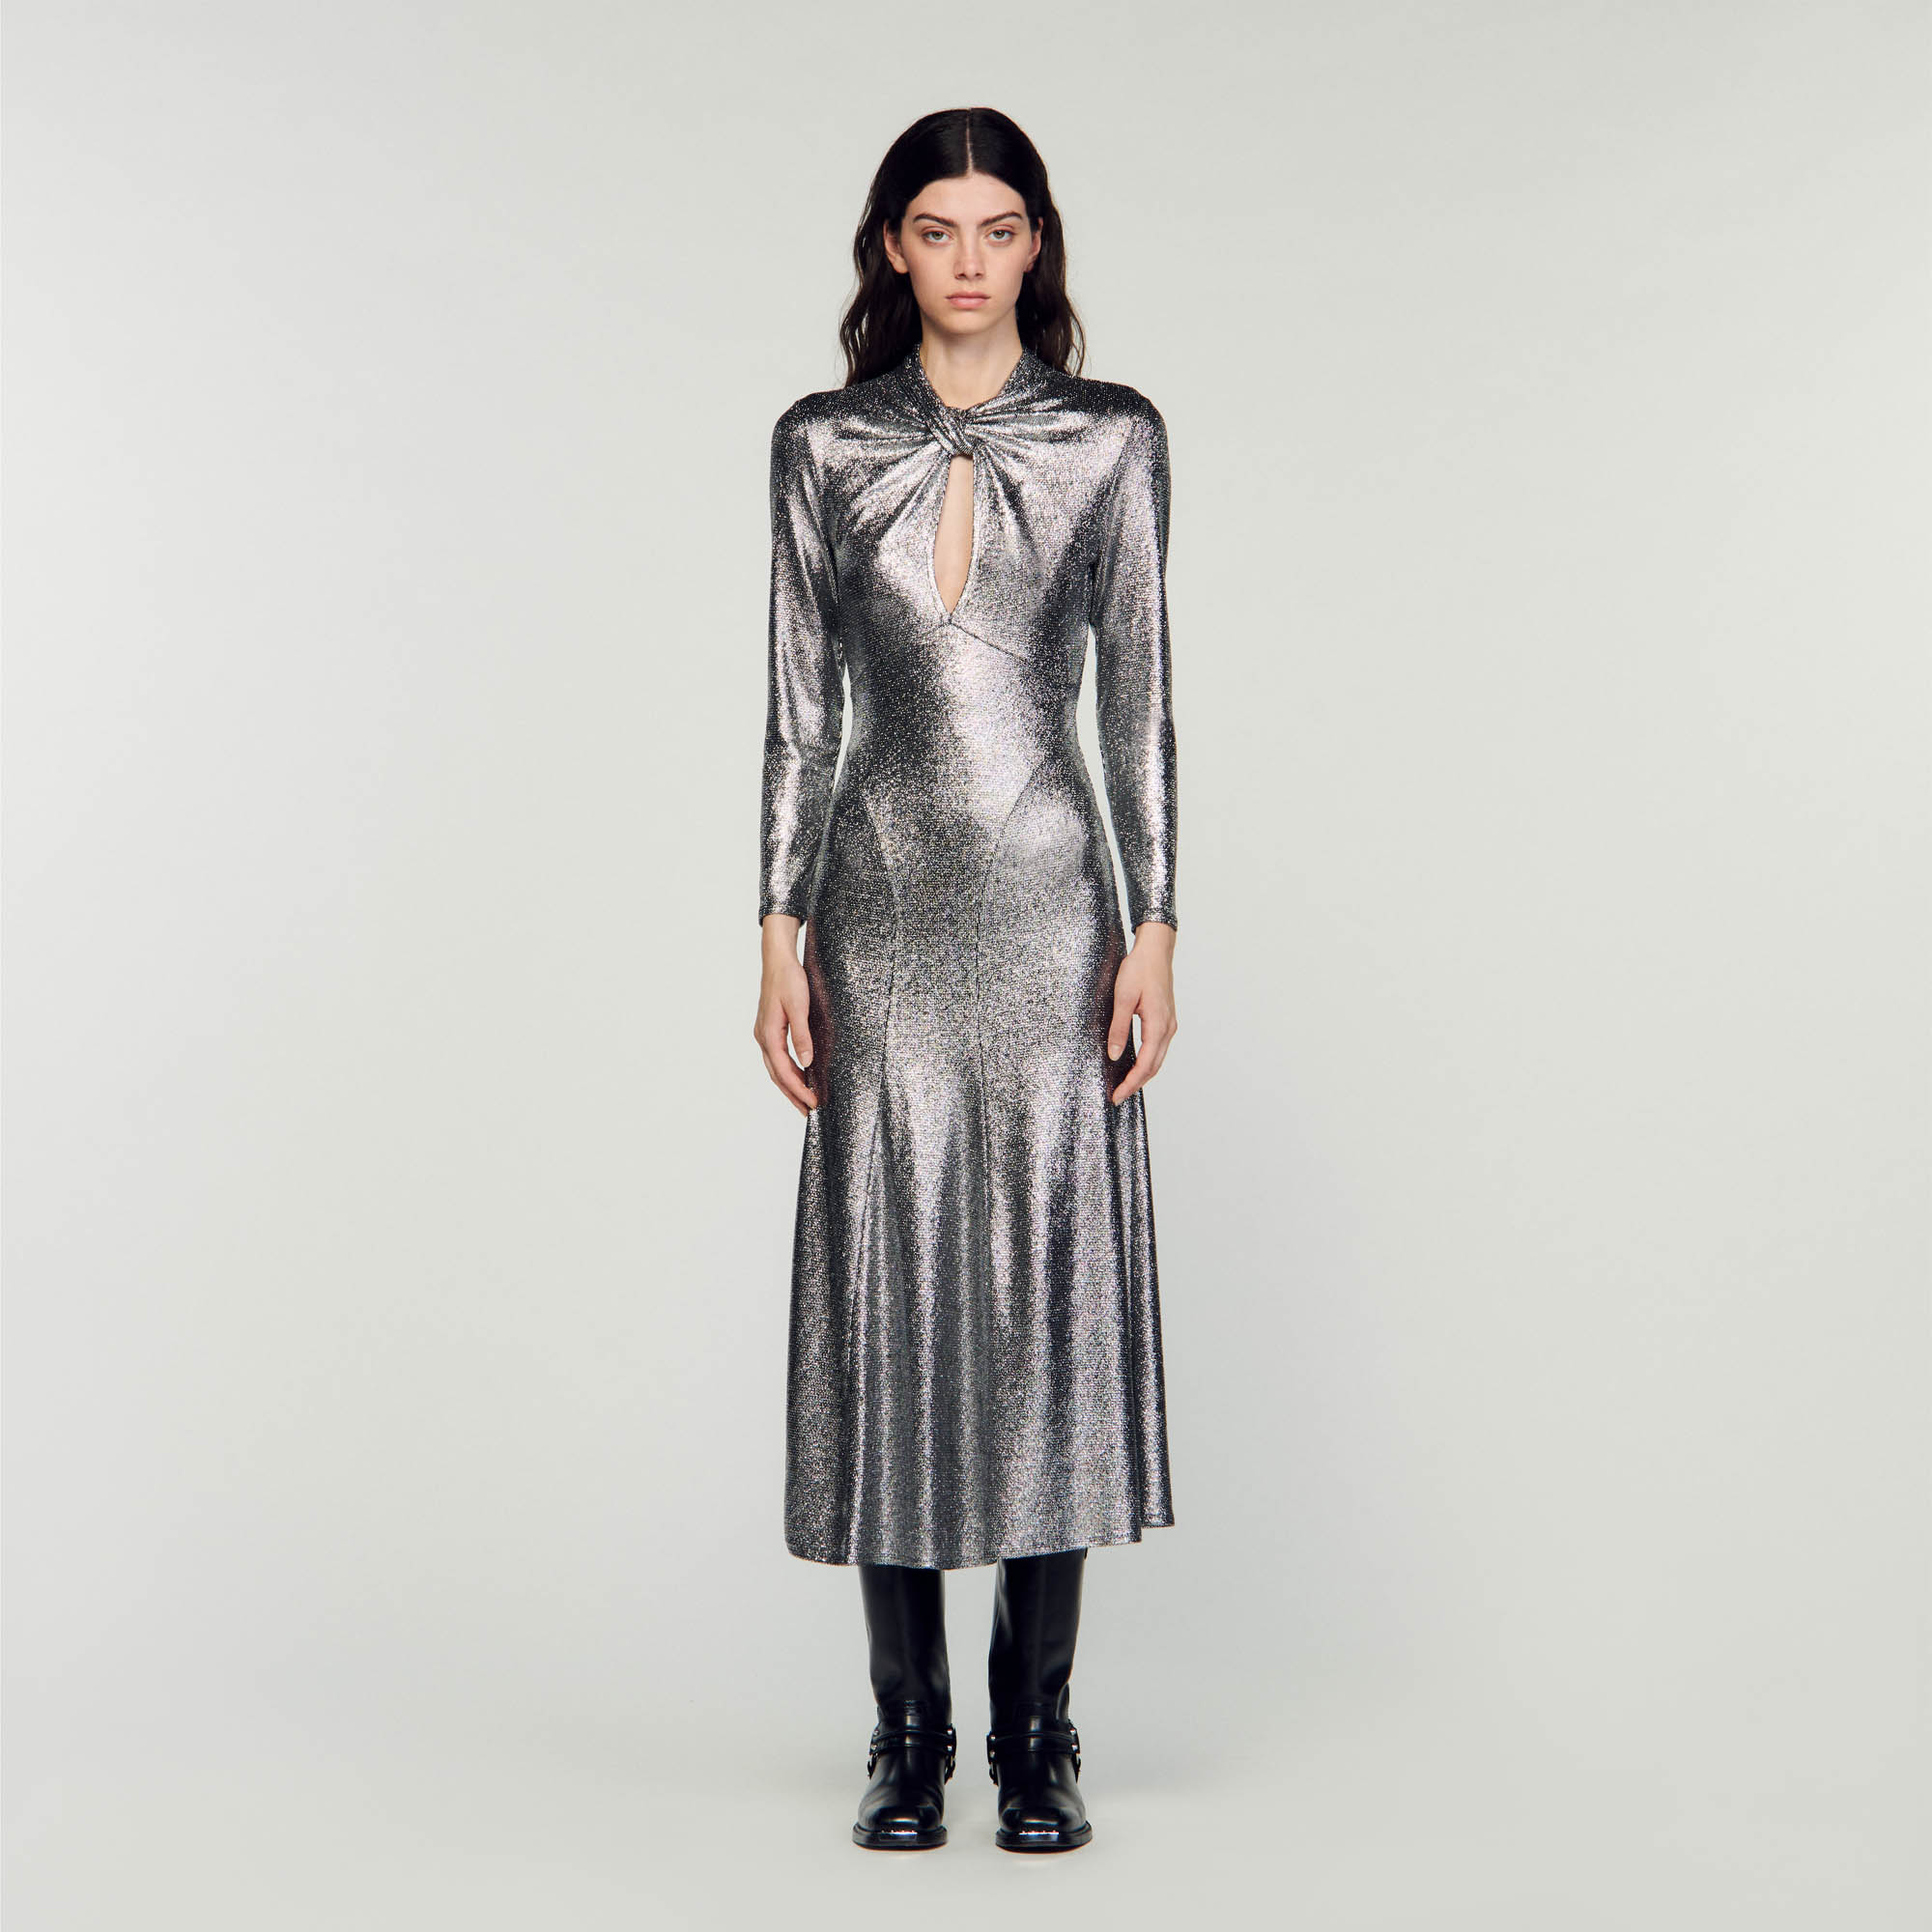 Sandro polyamide Metallic maxi dress featuring an openwork twist-effect high neck, long sleeves and a delicately flared skirt at the bottom